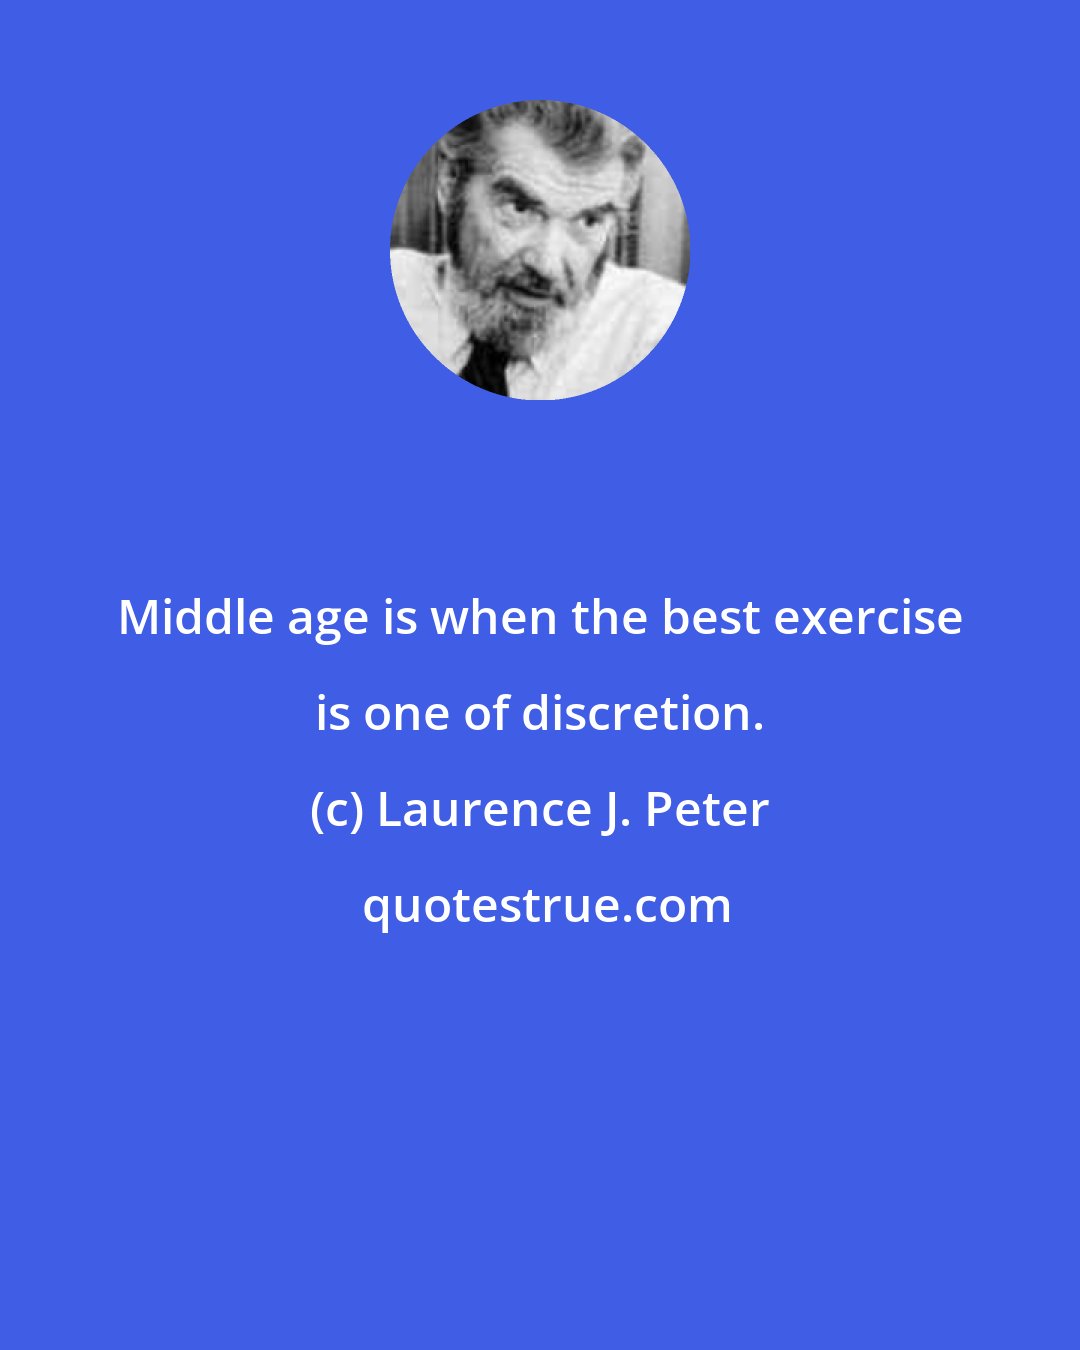 Laurence J. Peter: Middle age is when the best exercise is one of discretion.